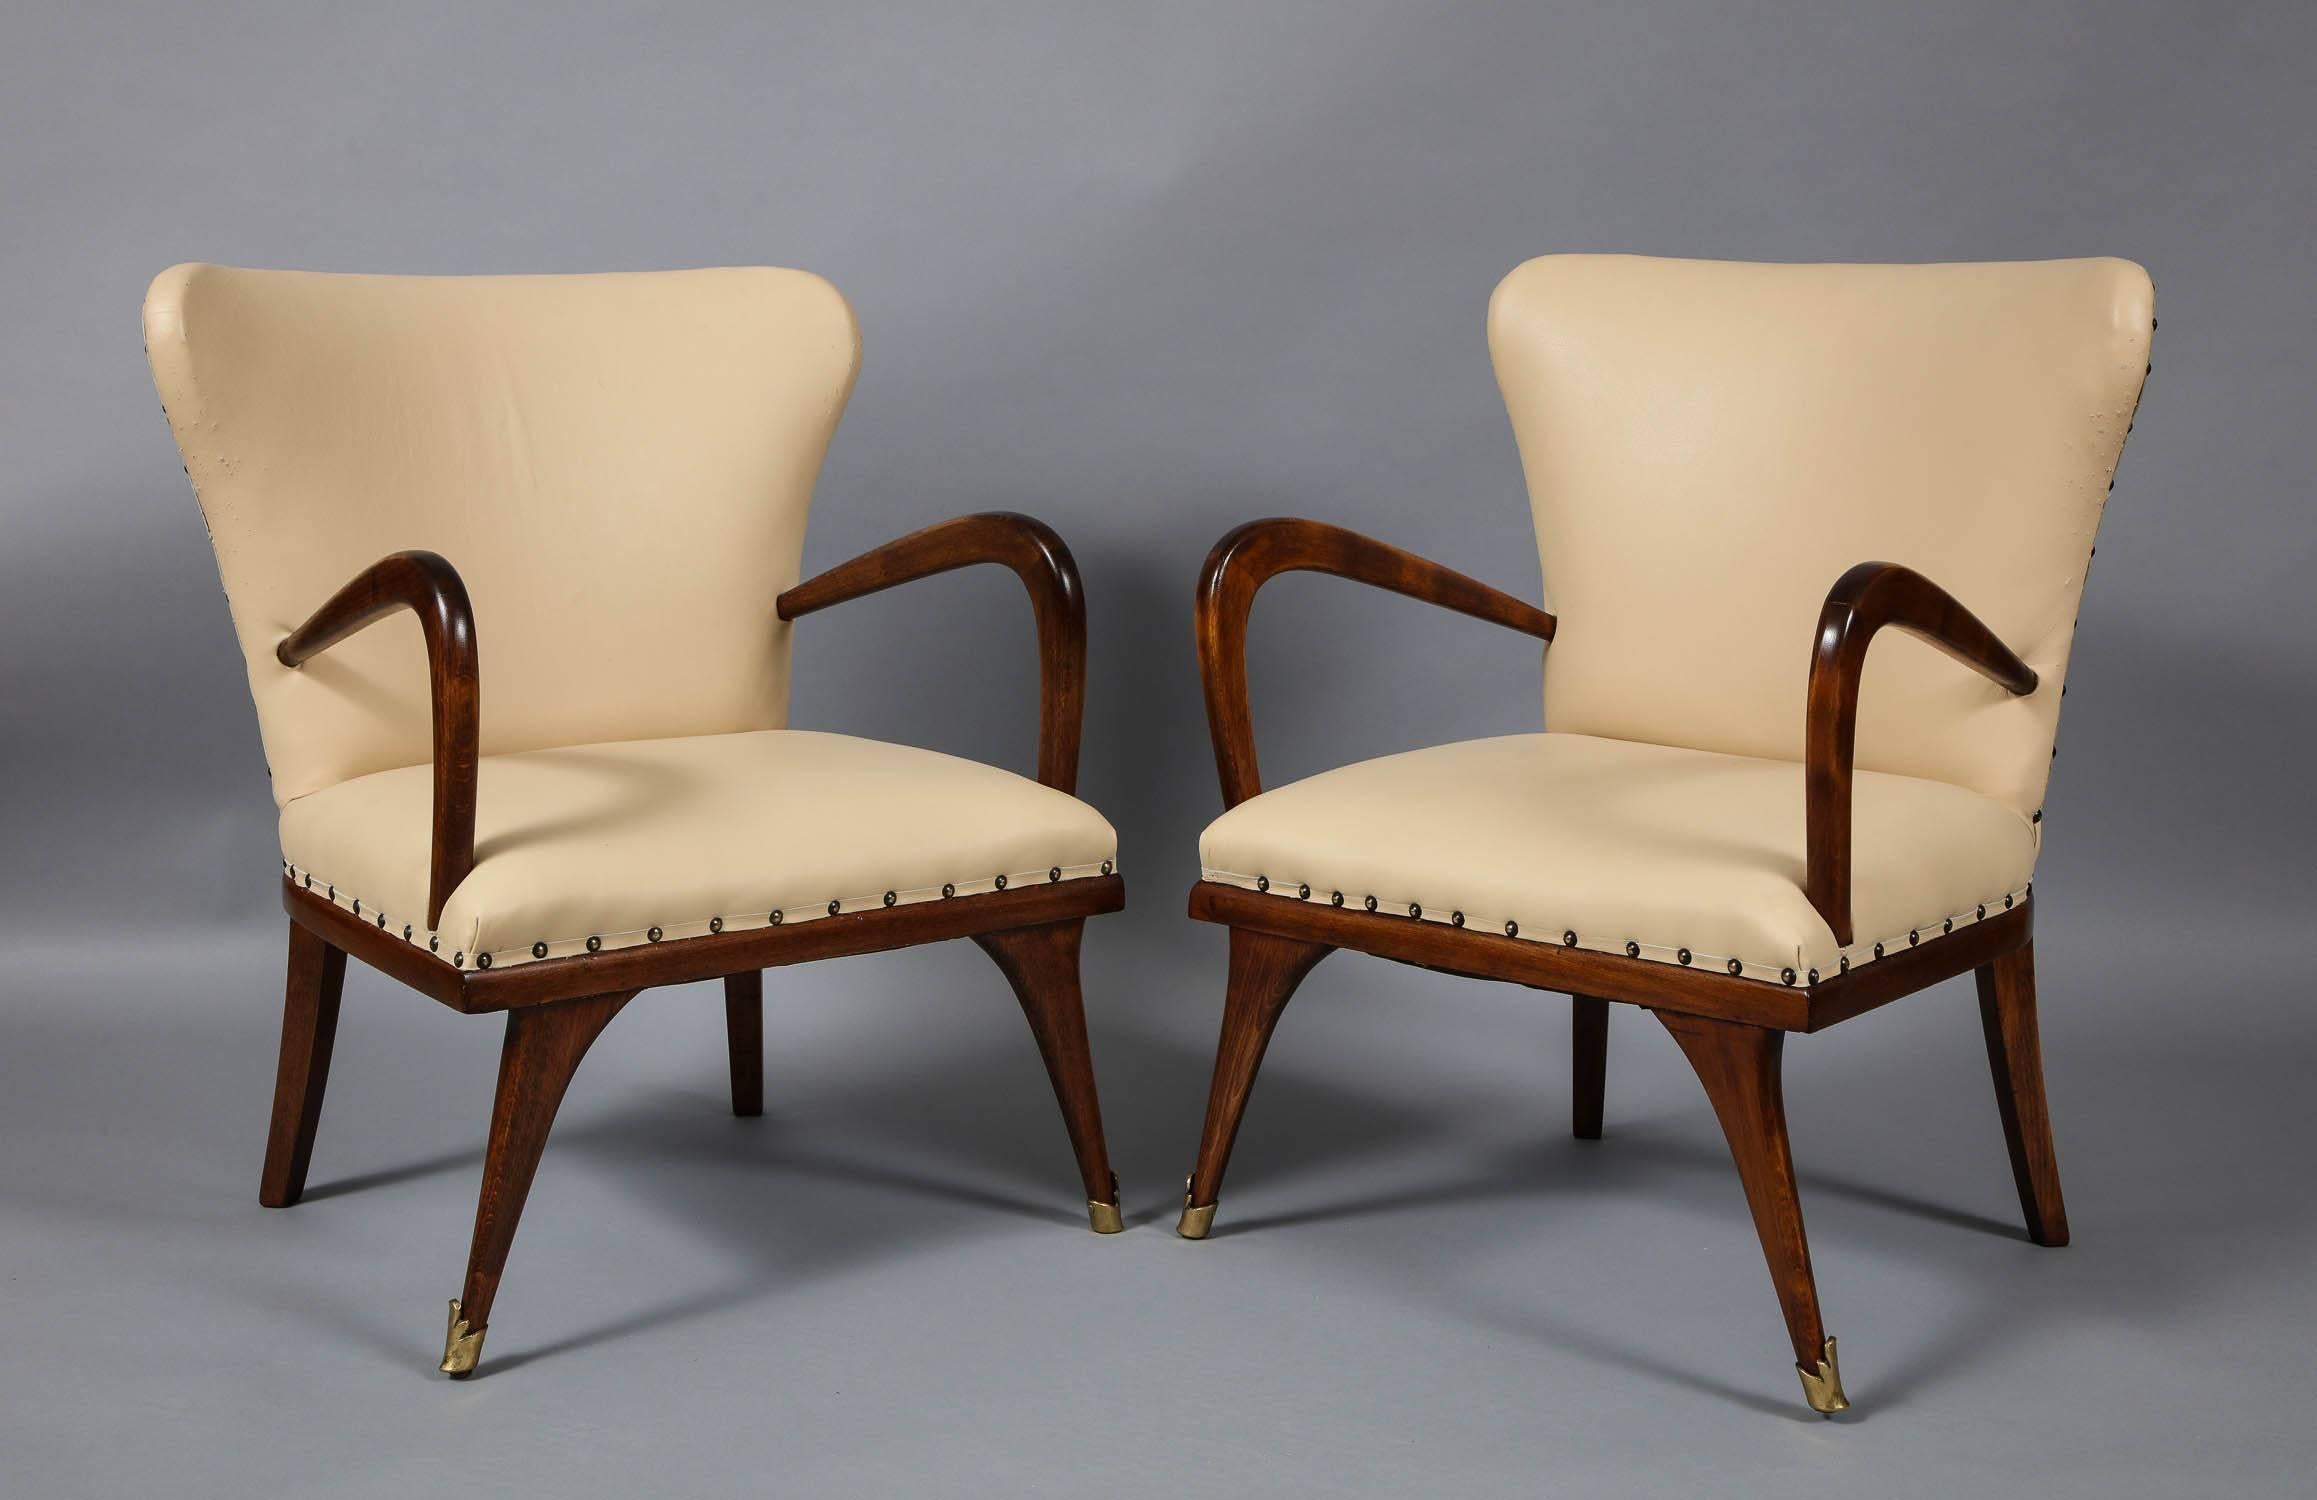 A pair of diminutive modernist armchairs in cream colored leather with studded seams having gently barreled backs, vaulting arms and swept front and back legs, the front legs with decorative brass sabots. (Upholstery as found), circa 1960s.

 